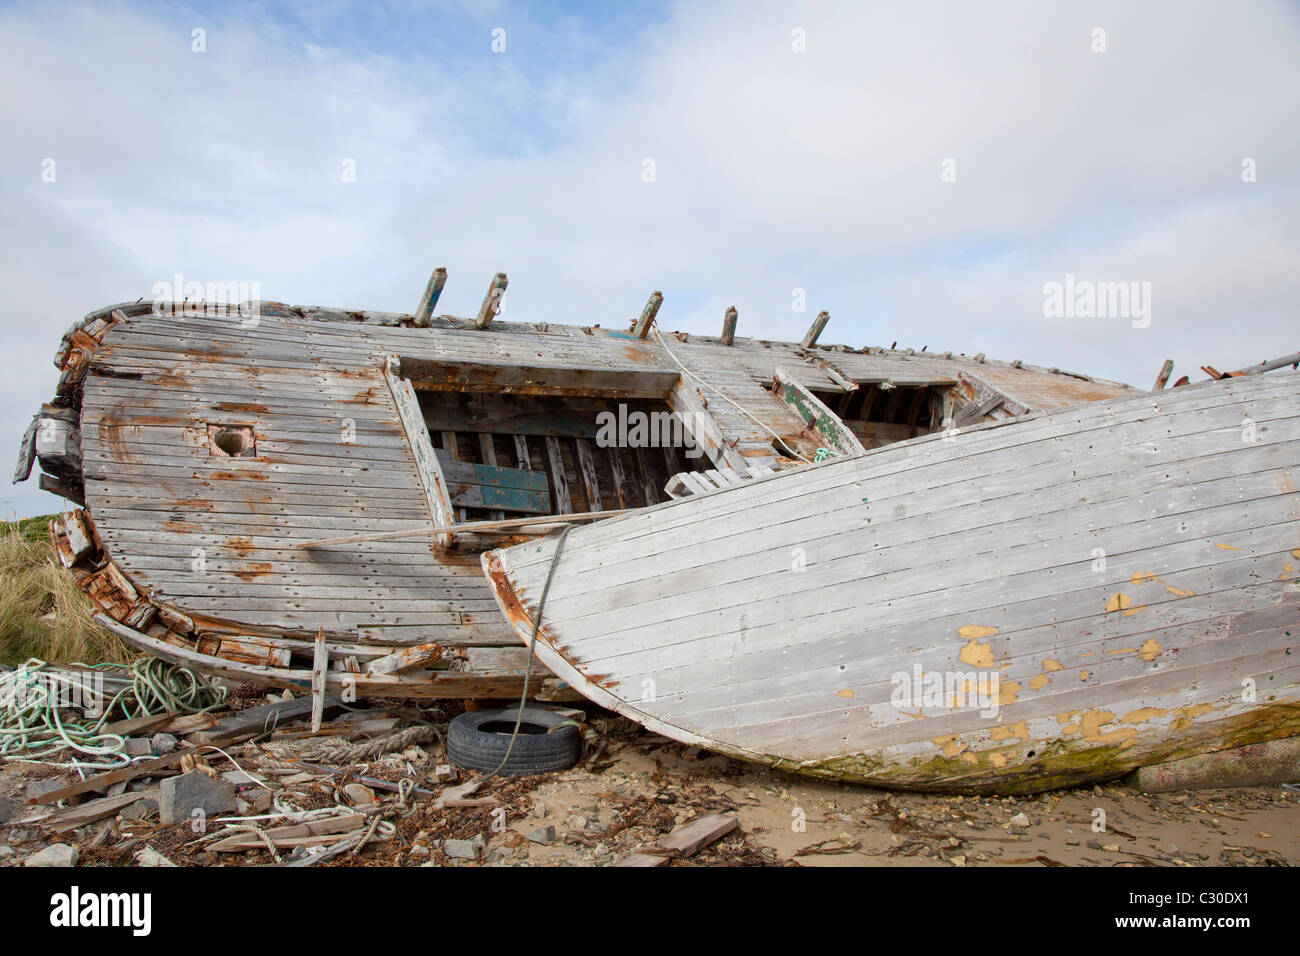 Beached wooden boats at Port Stanley, East Falklands Stock Photo